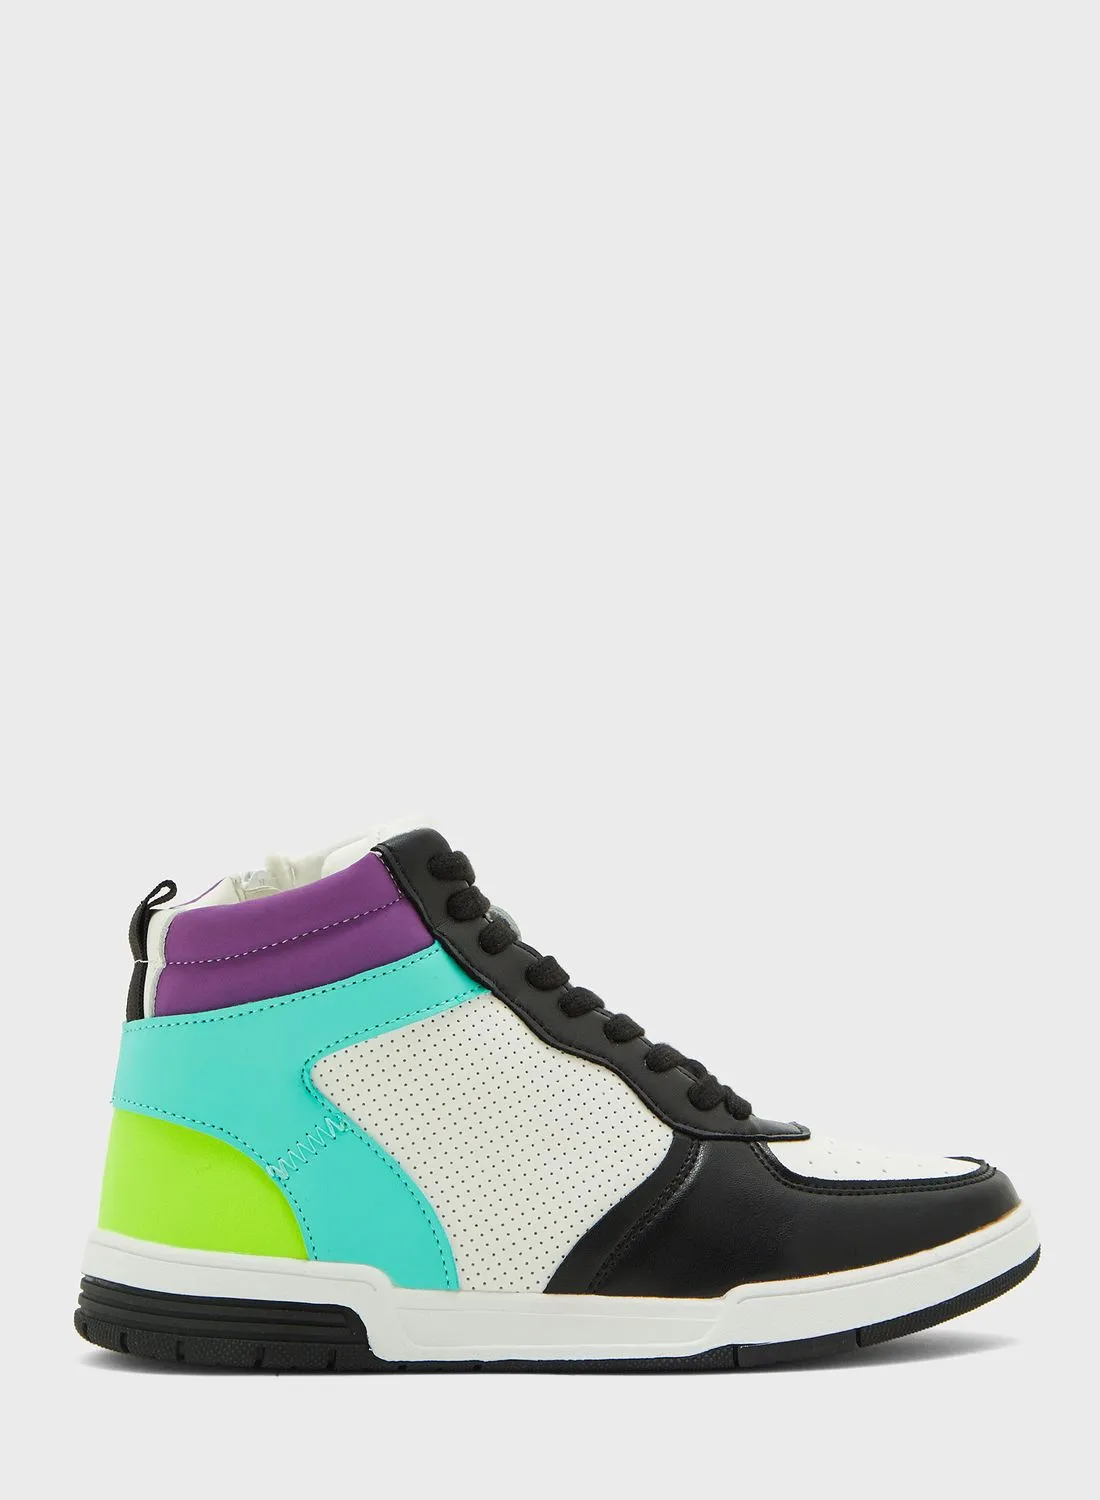 CALL IT SPRING Shadow High Top Sneakers